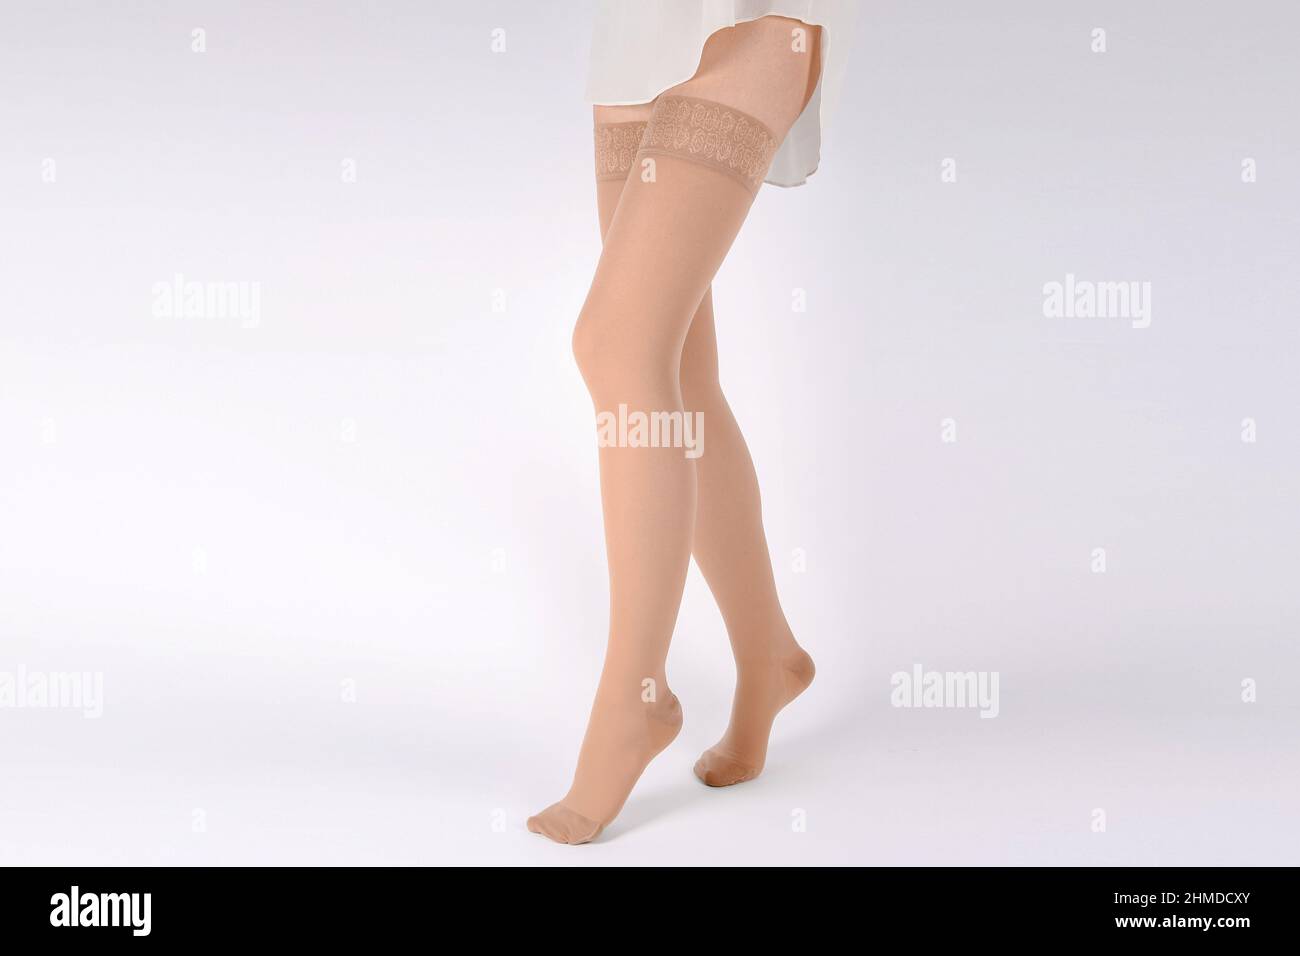 https://c8.alamy.com/comp/2HMDCXY/compression-hosiery-medical-compression-stockings-and-tights-for-varicose-veins-and-venouse-therapy-socks-for-man-and-women-clinical-compression-2HMDCXY.jpg